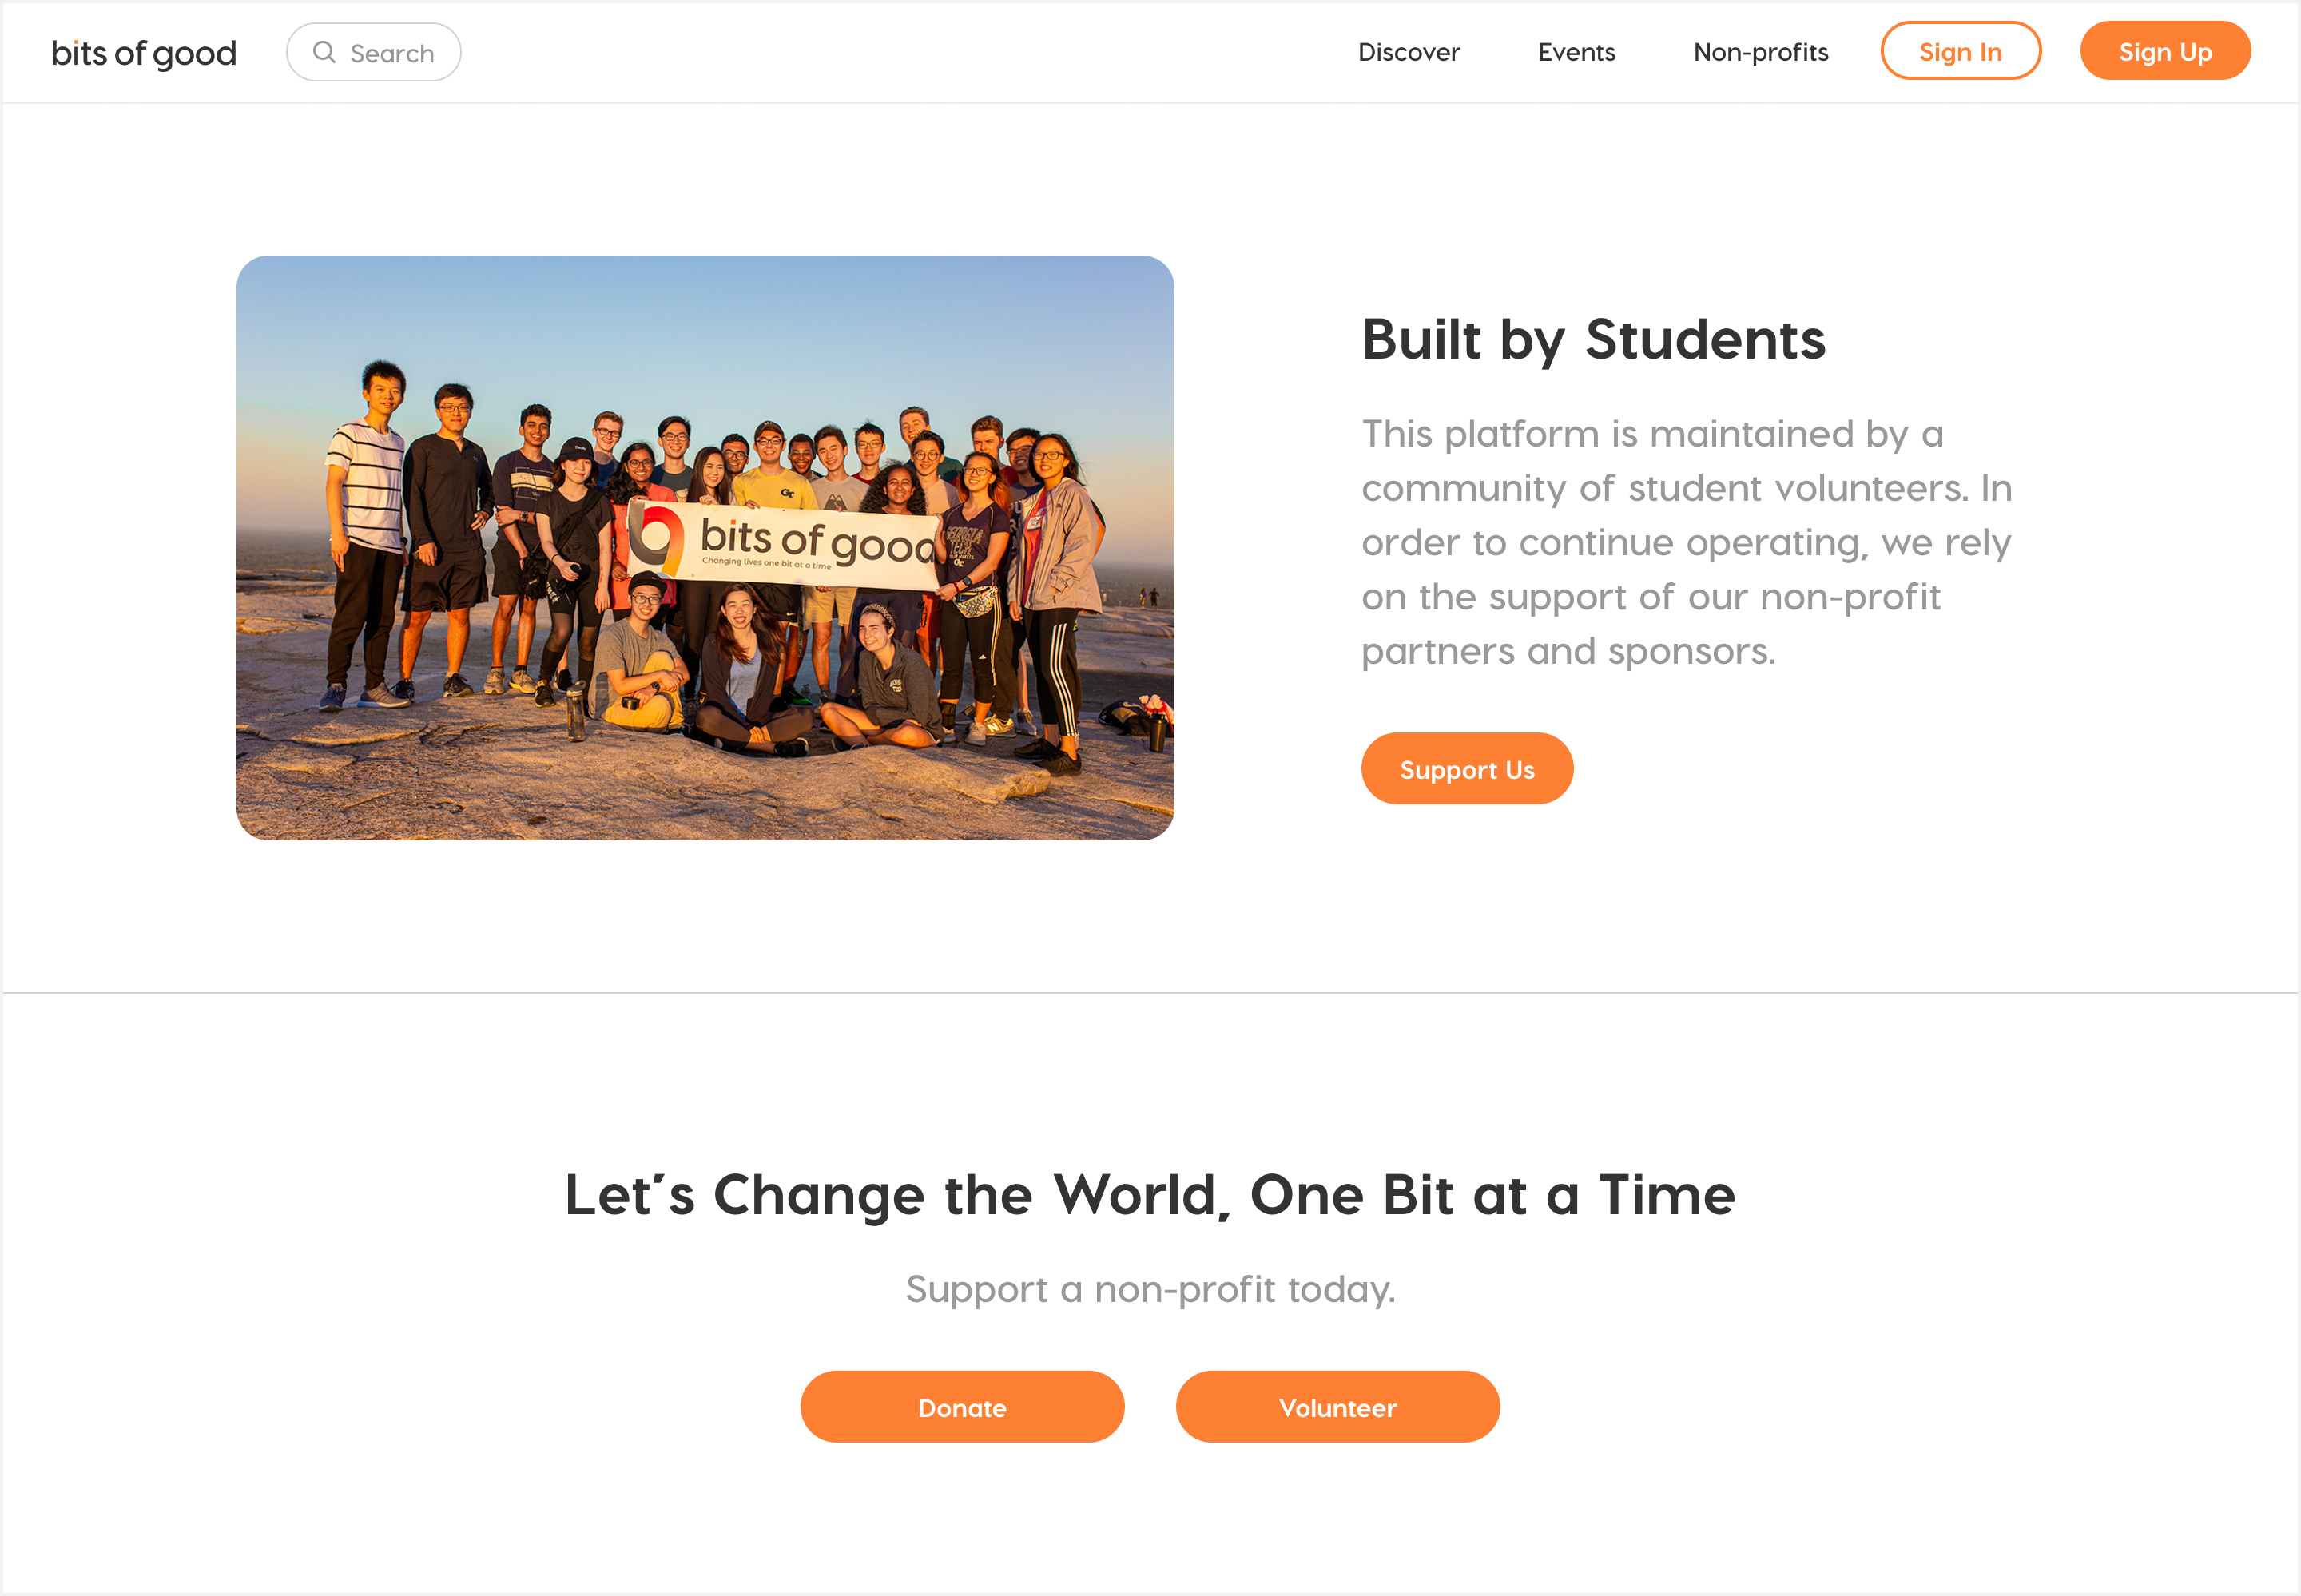 A section of the landing page that highlights Bits of Good, the student organization.